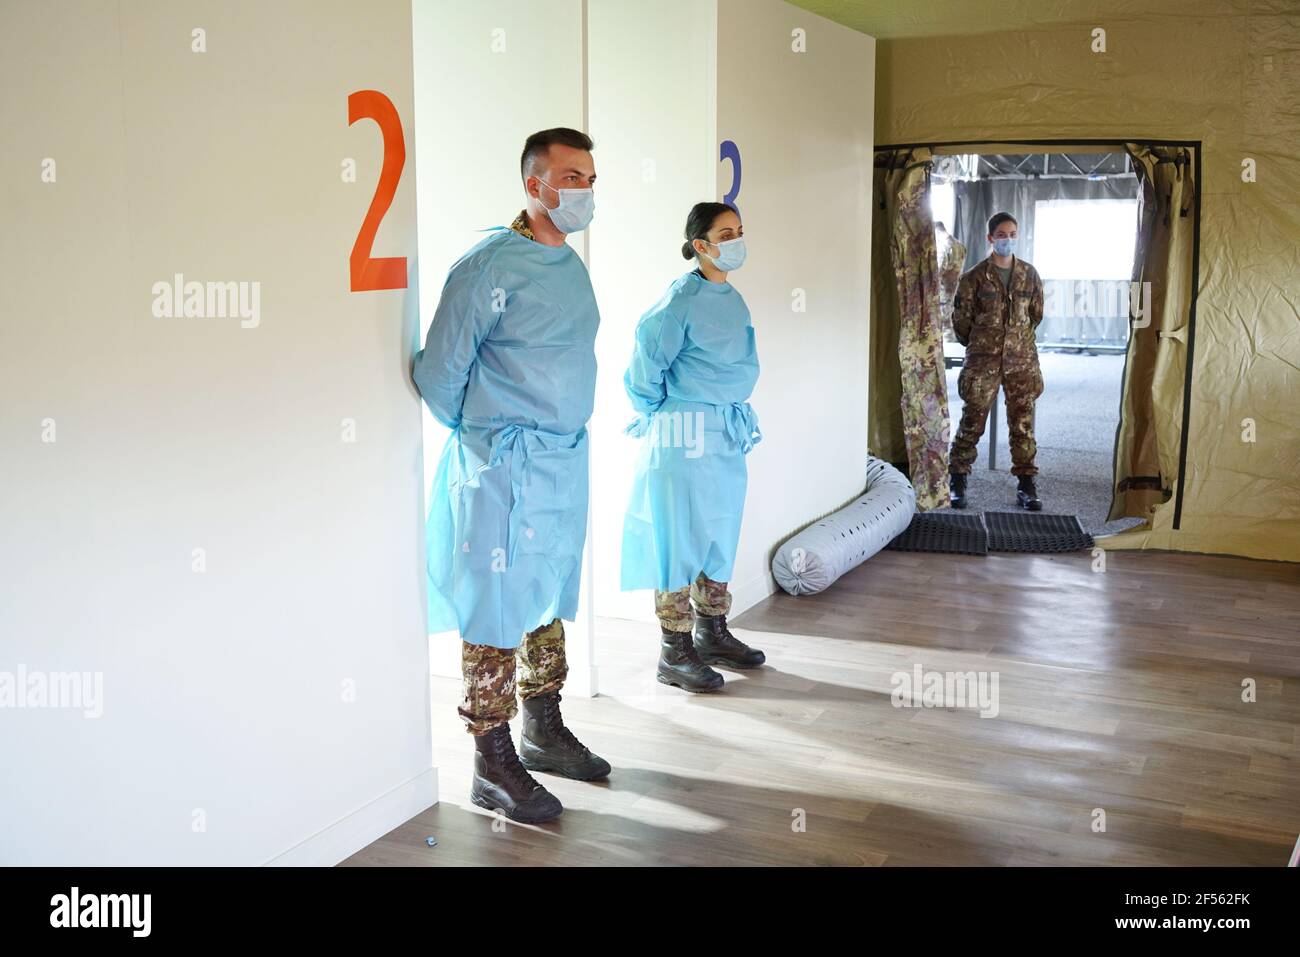 Hotspot for mass immunisation with three vaccination lines manned by army medical staff. Turin, Italy - March 2021 Stock Photo